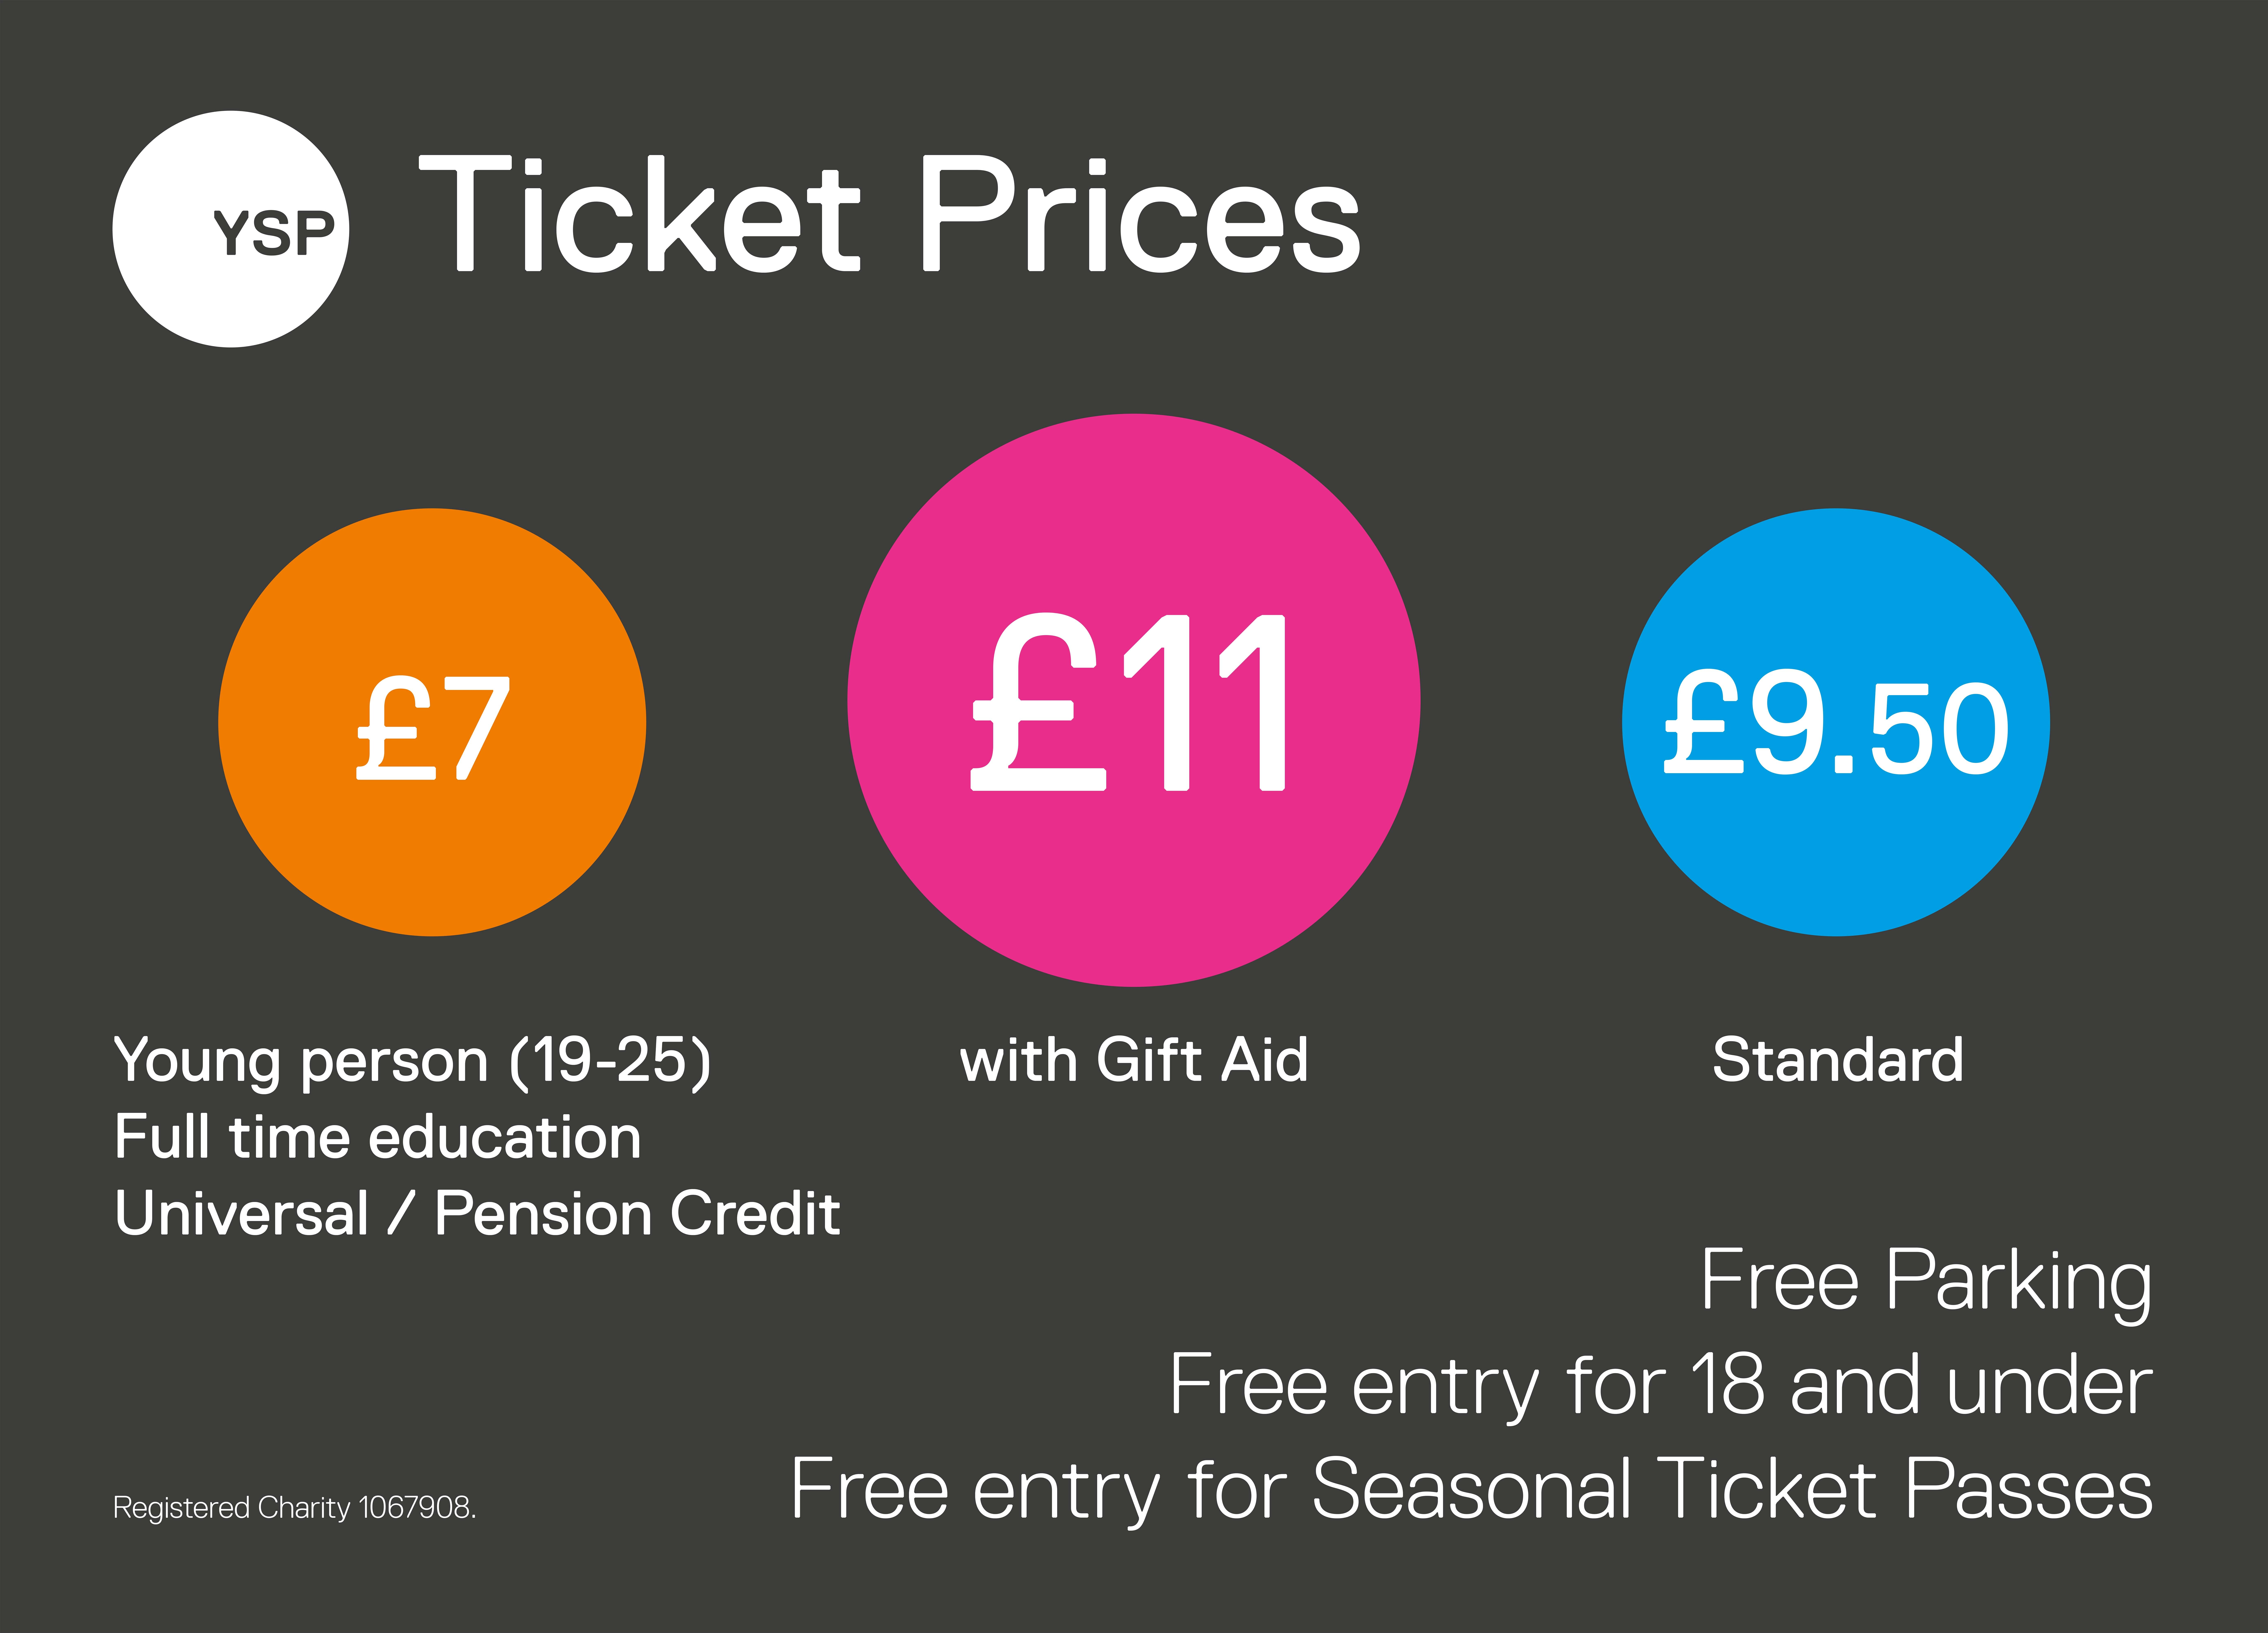 A graphic showing YSP ticket prices. Three coloured circles display prices: £7 young person (19-25), full time eduction, Universal/Pension Credit. £11 with Gift Aid. £9.50 Standard. Free parking. Free entry for 18 and under. Free entry for Seasonal Ticket Passes. , £11 and £9.50